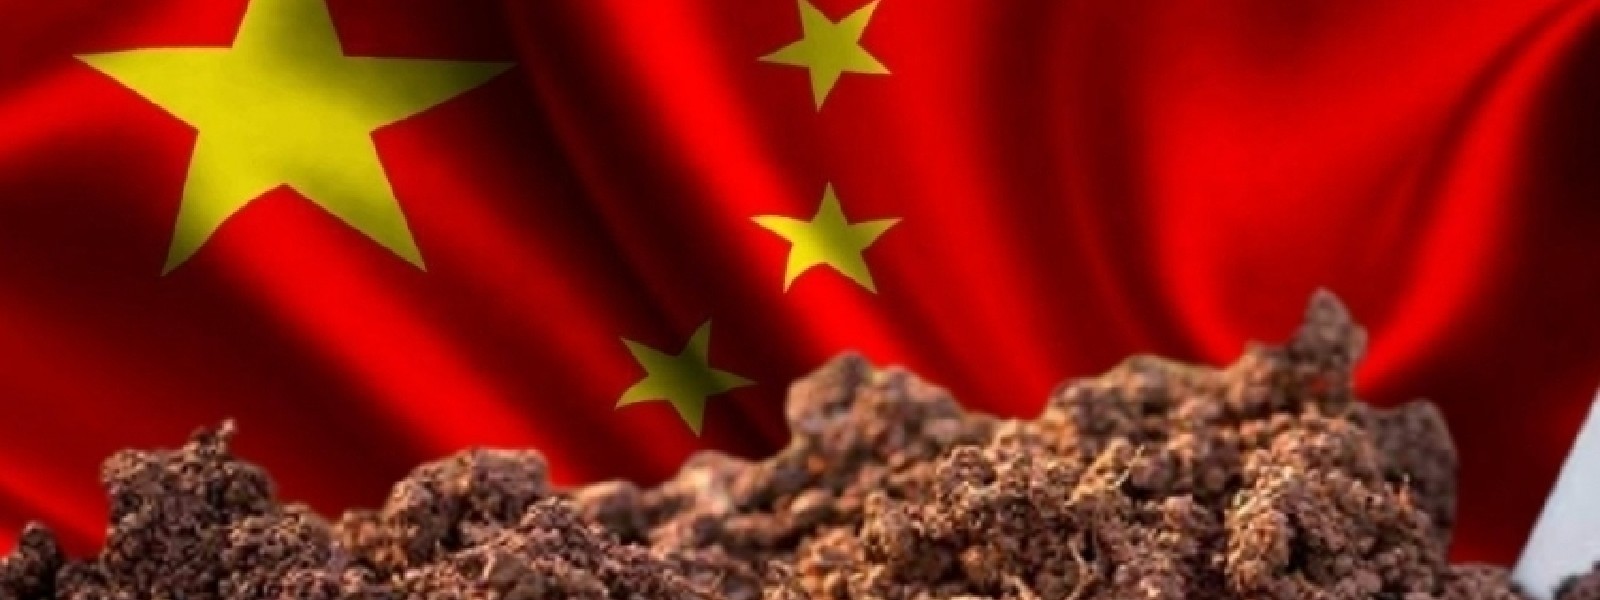 Chinese Fertilizer: AG recommends loss recovery